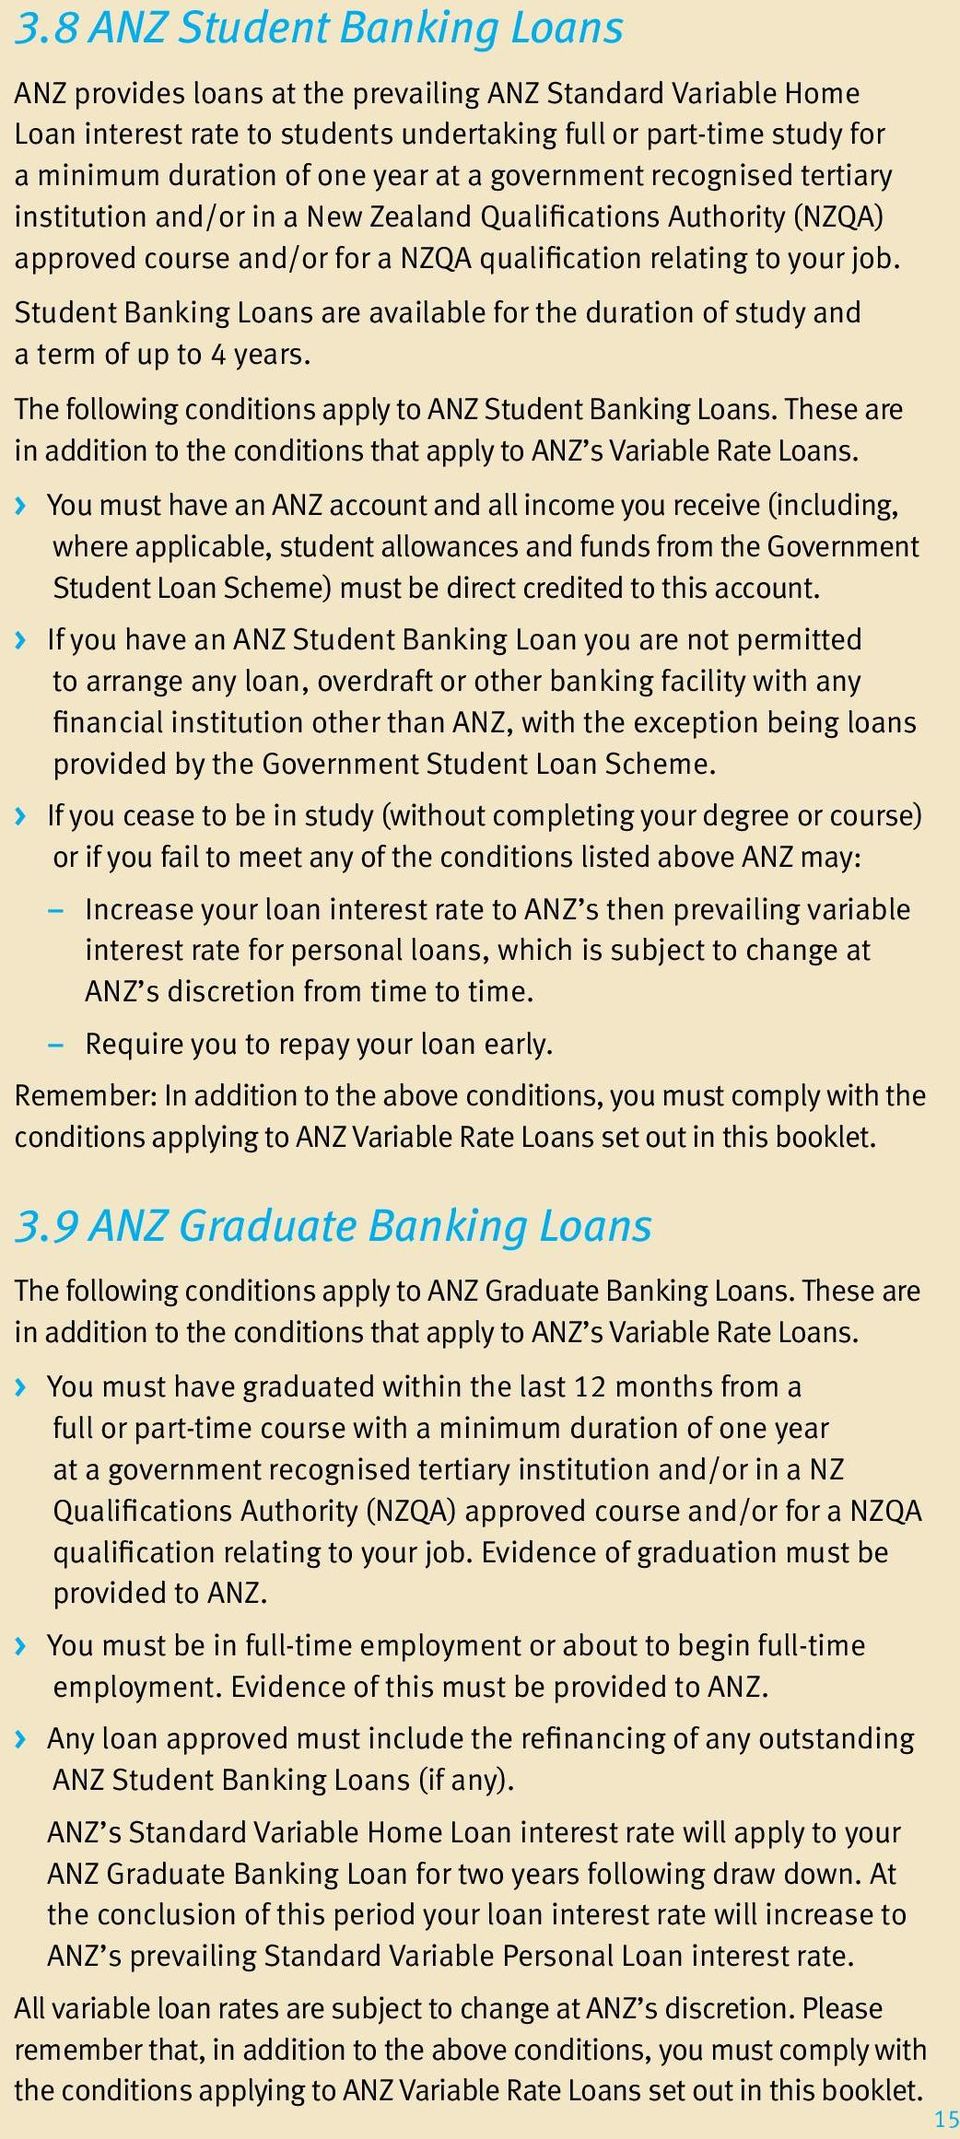 Student Banking Loans are available for the duration of study and a term of up to 4 years. The following conditions apply to ANZ Student Banking Loans.